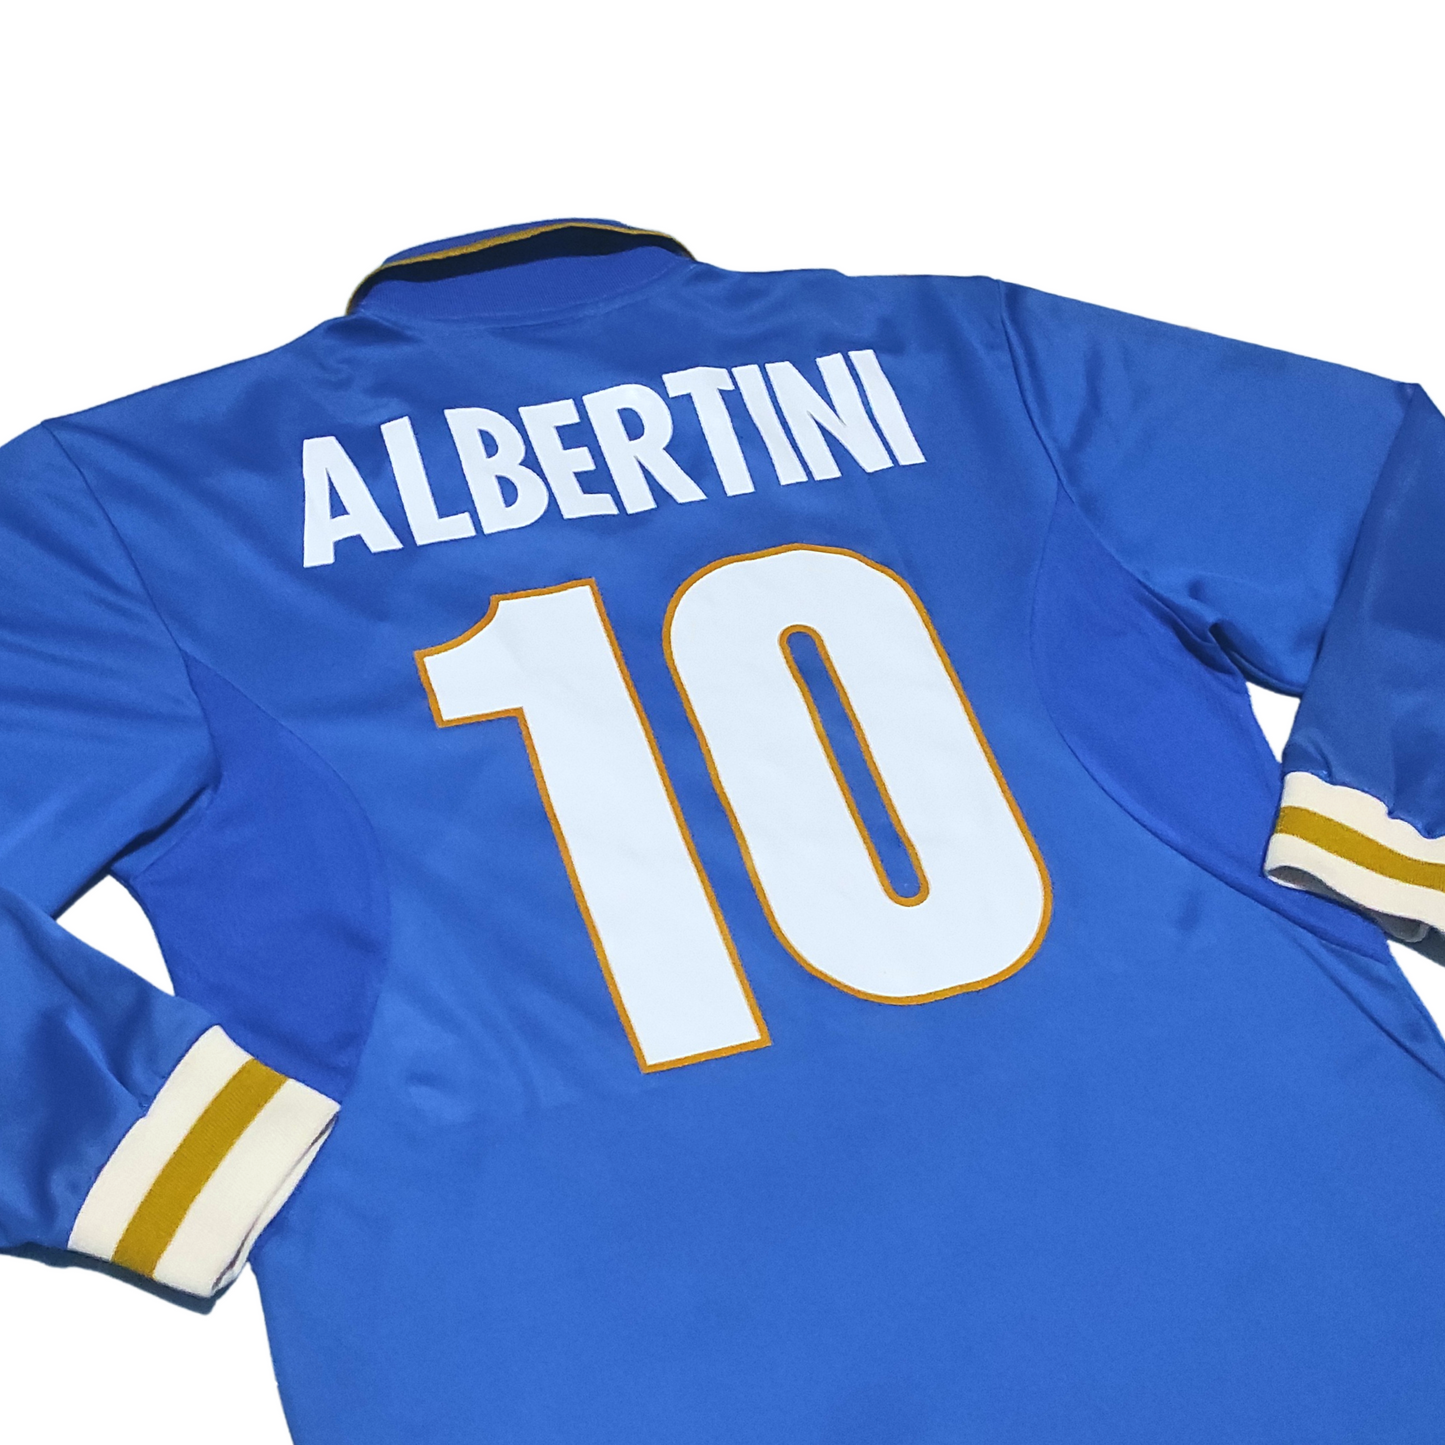 Italy Home L/S Player Issue Shirt 1996-1997 Albertini (L)